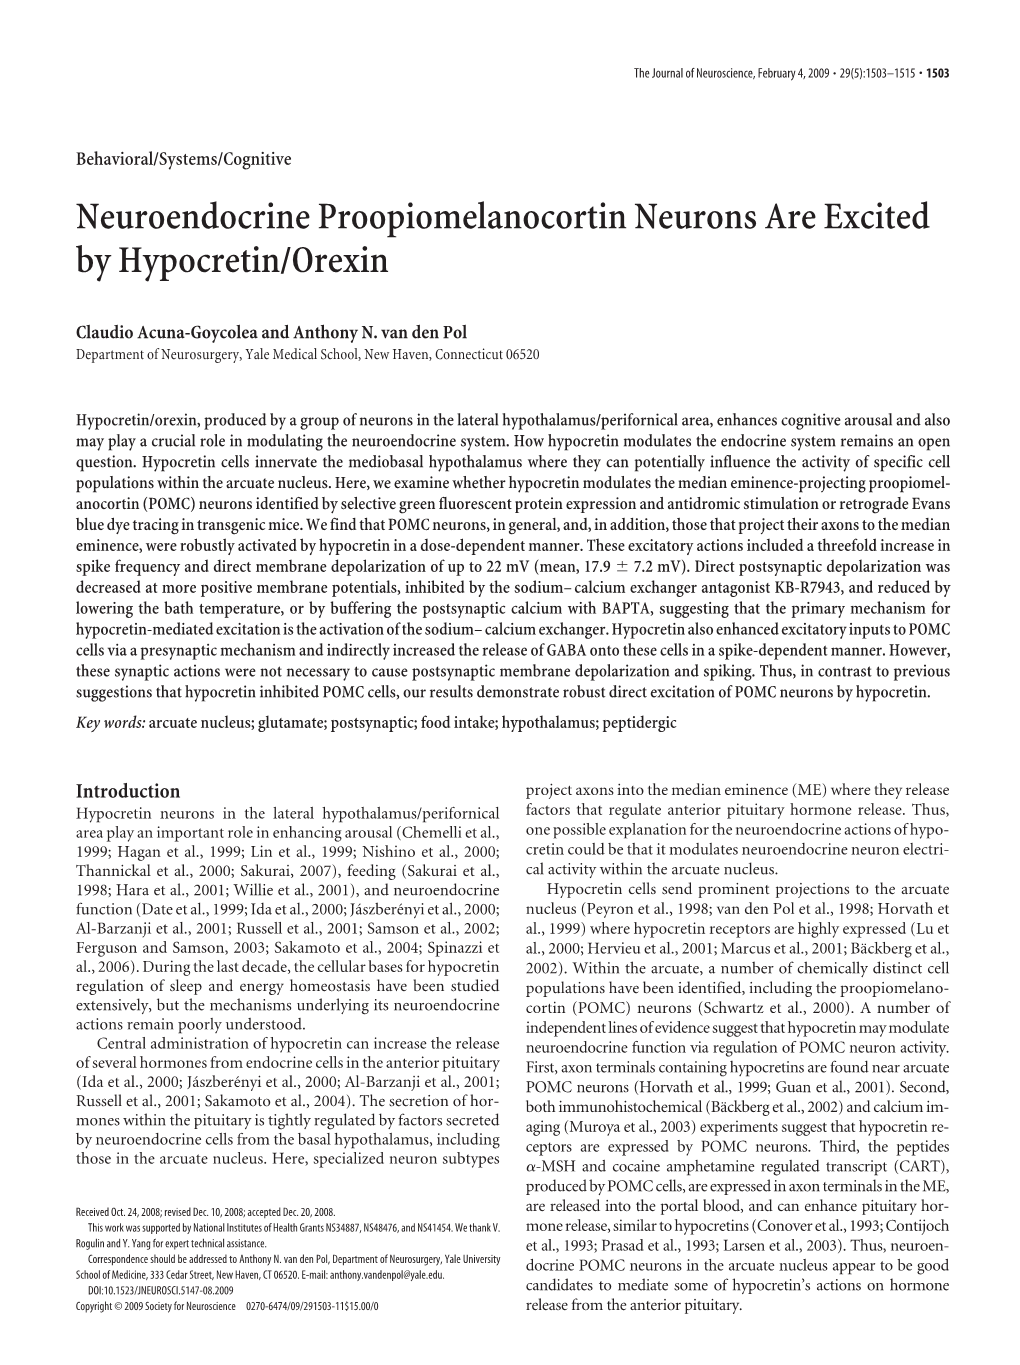 Neuroendocrine Proopiomelanocortin Neurons Are Excited by Hypocretin/Orexin